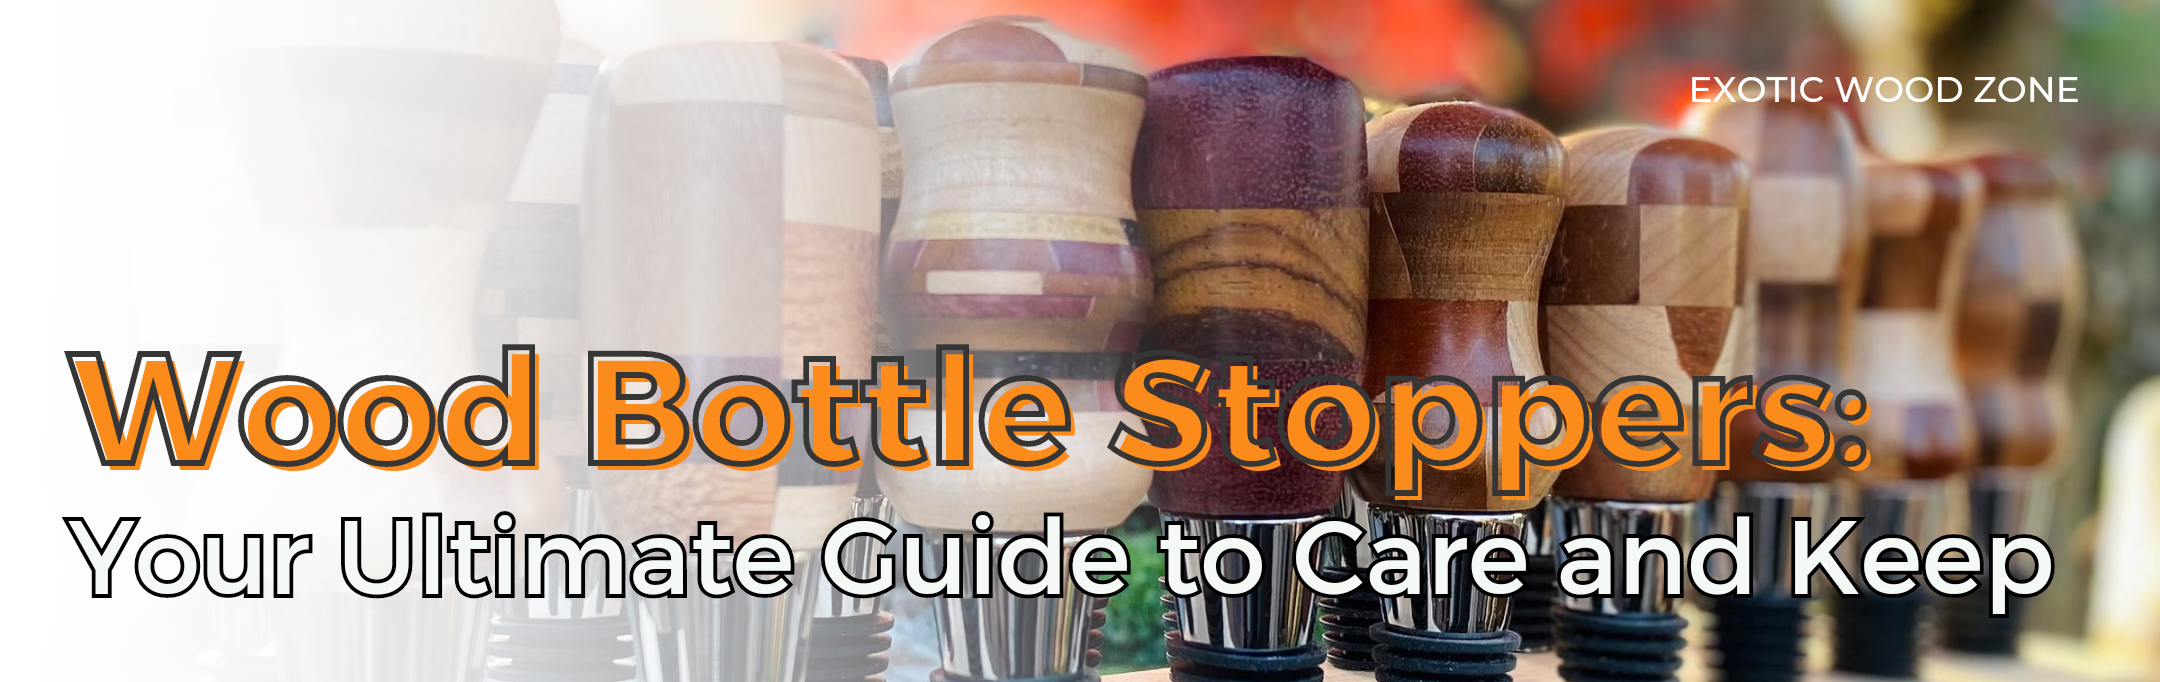 Wood Bottle Stoppers: Your Ultimate Guide to Care and Keep